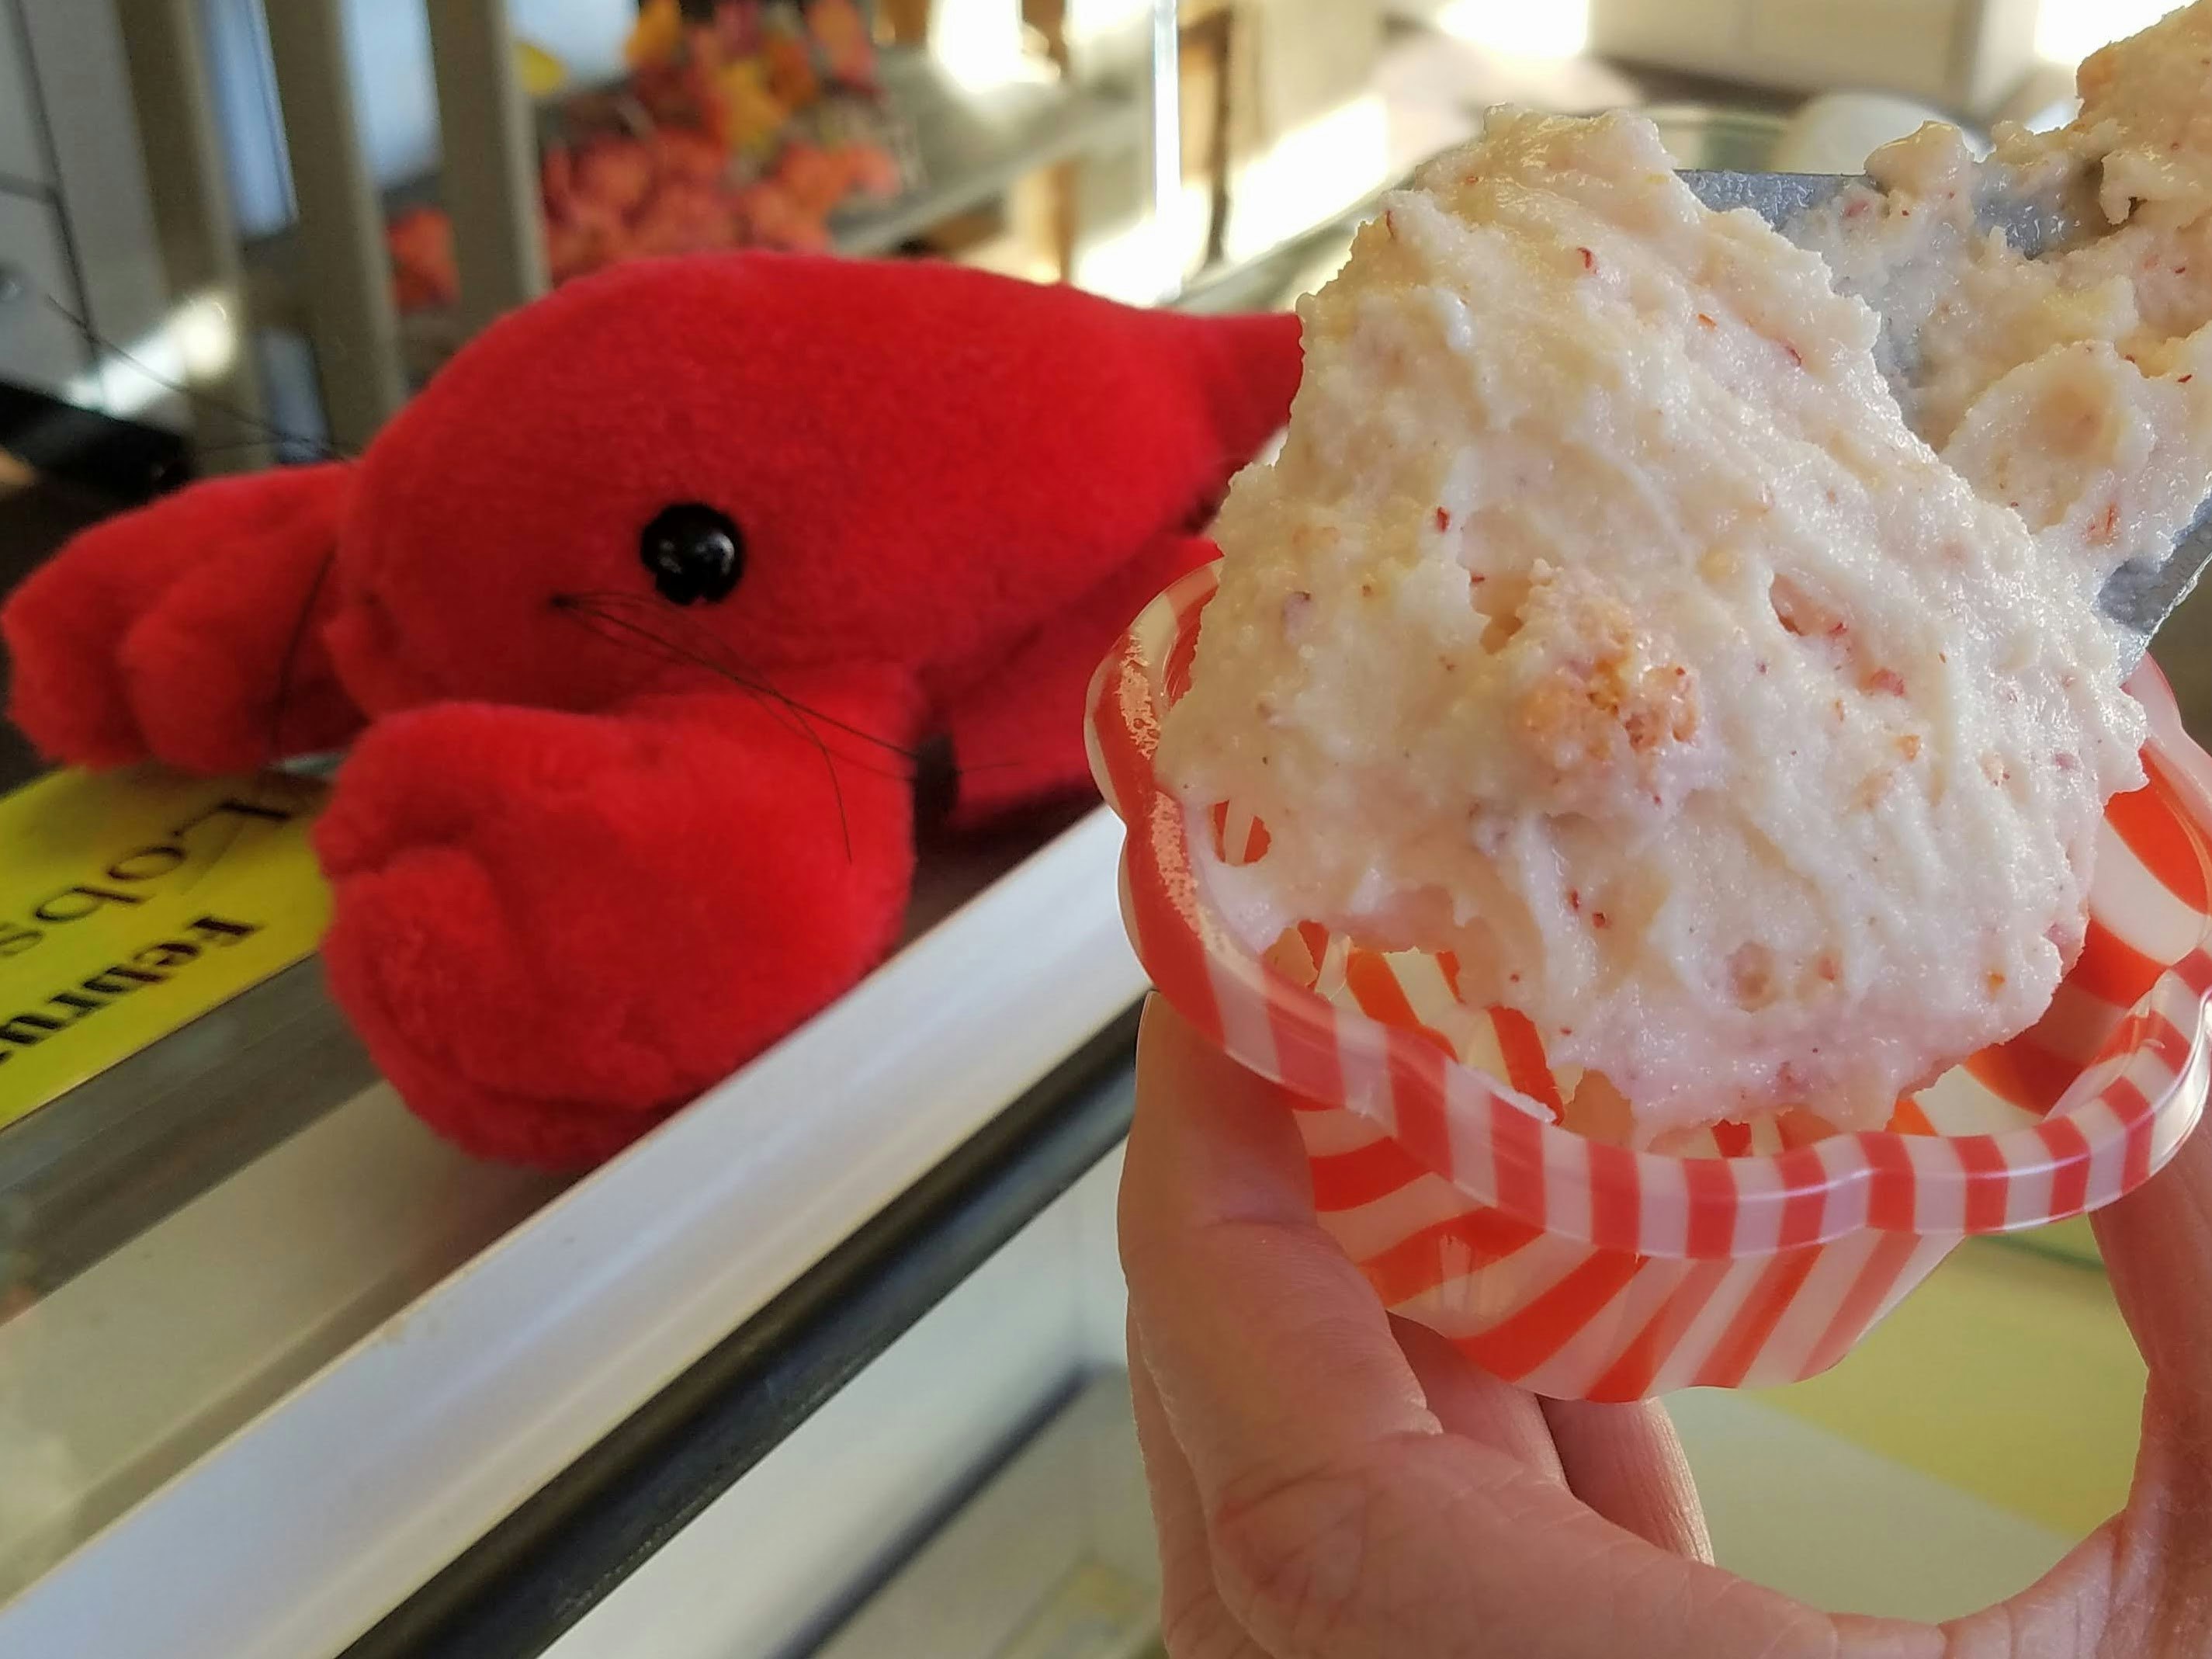 The photographer's hand is holding a plastic cup of Acadian Maple's lobster gelato in the frame. There's a counter with a lobster soft toy in the background.